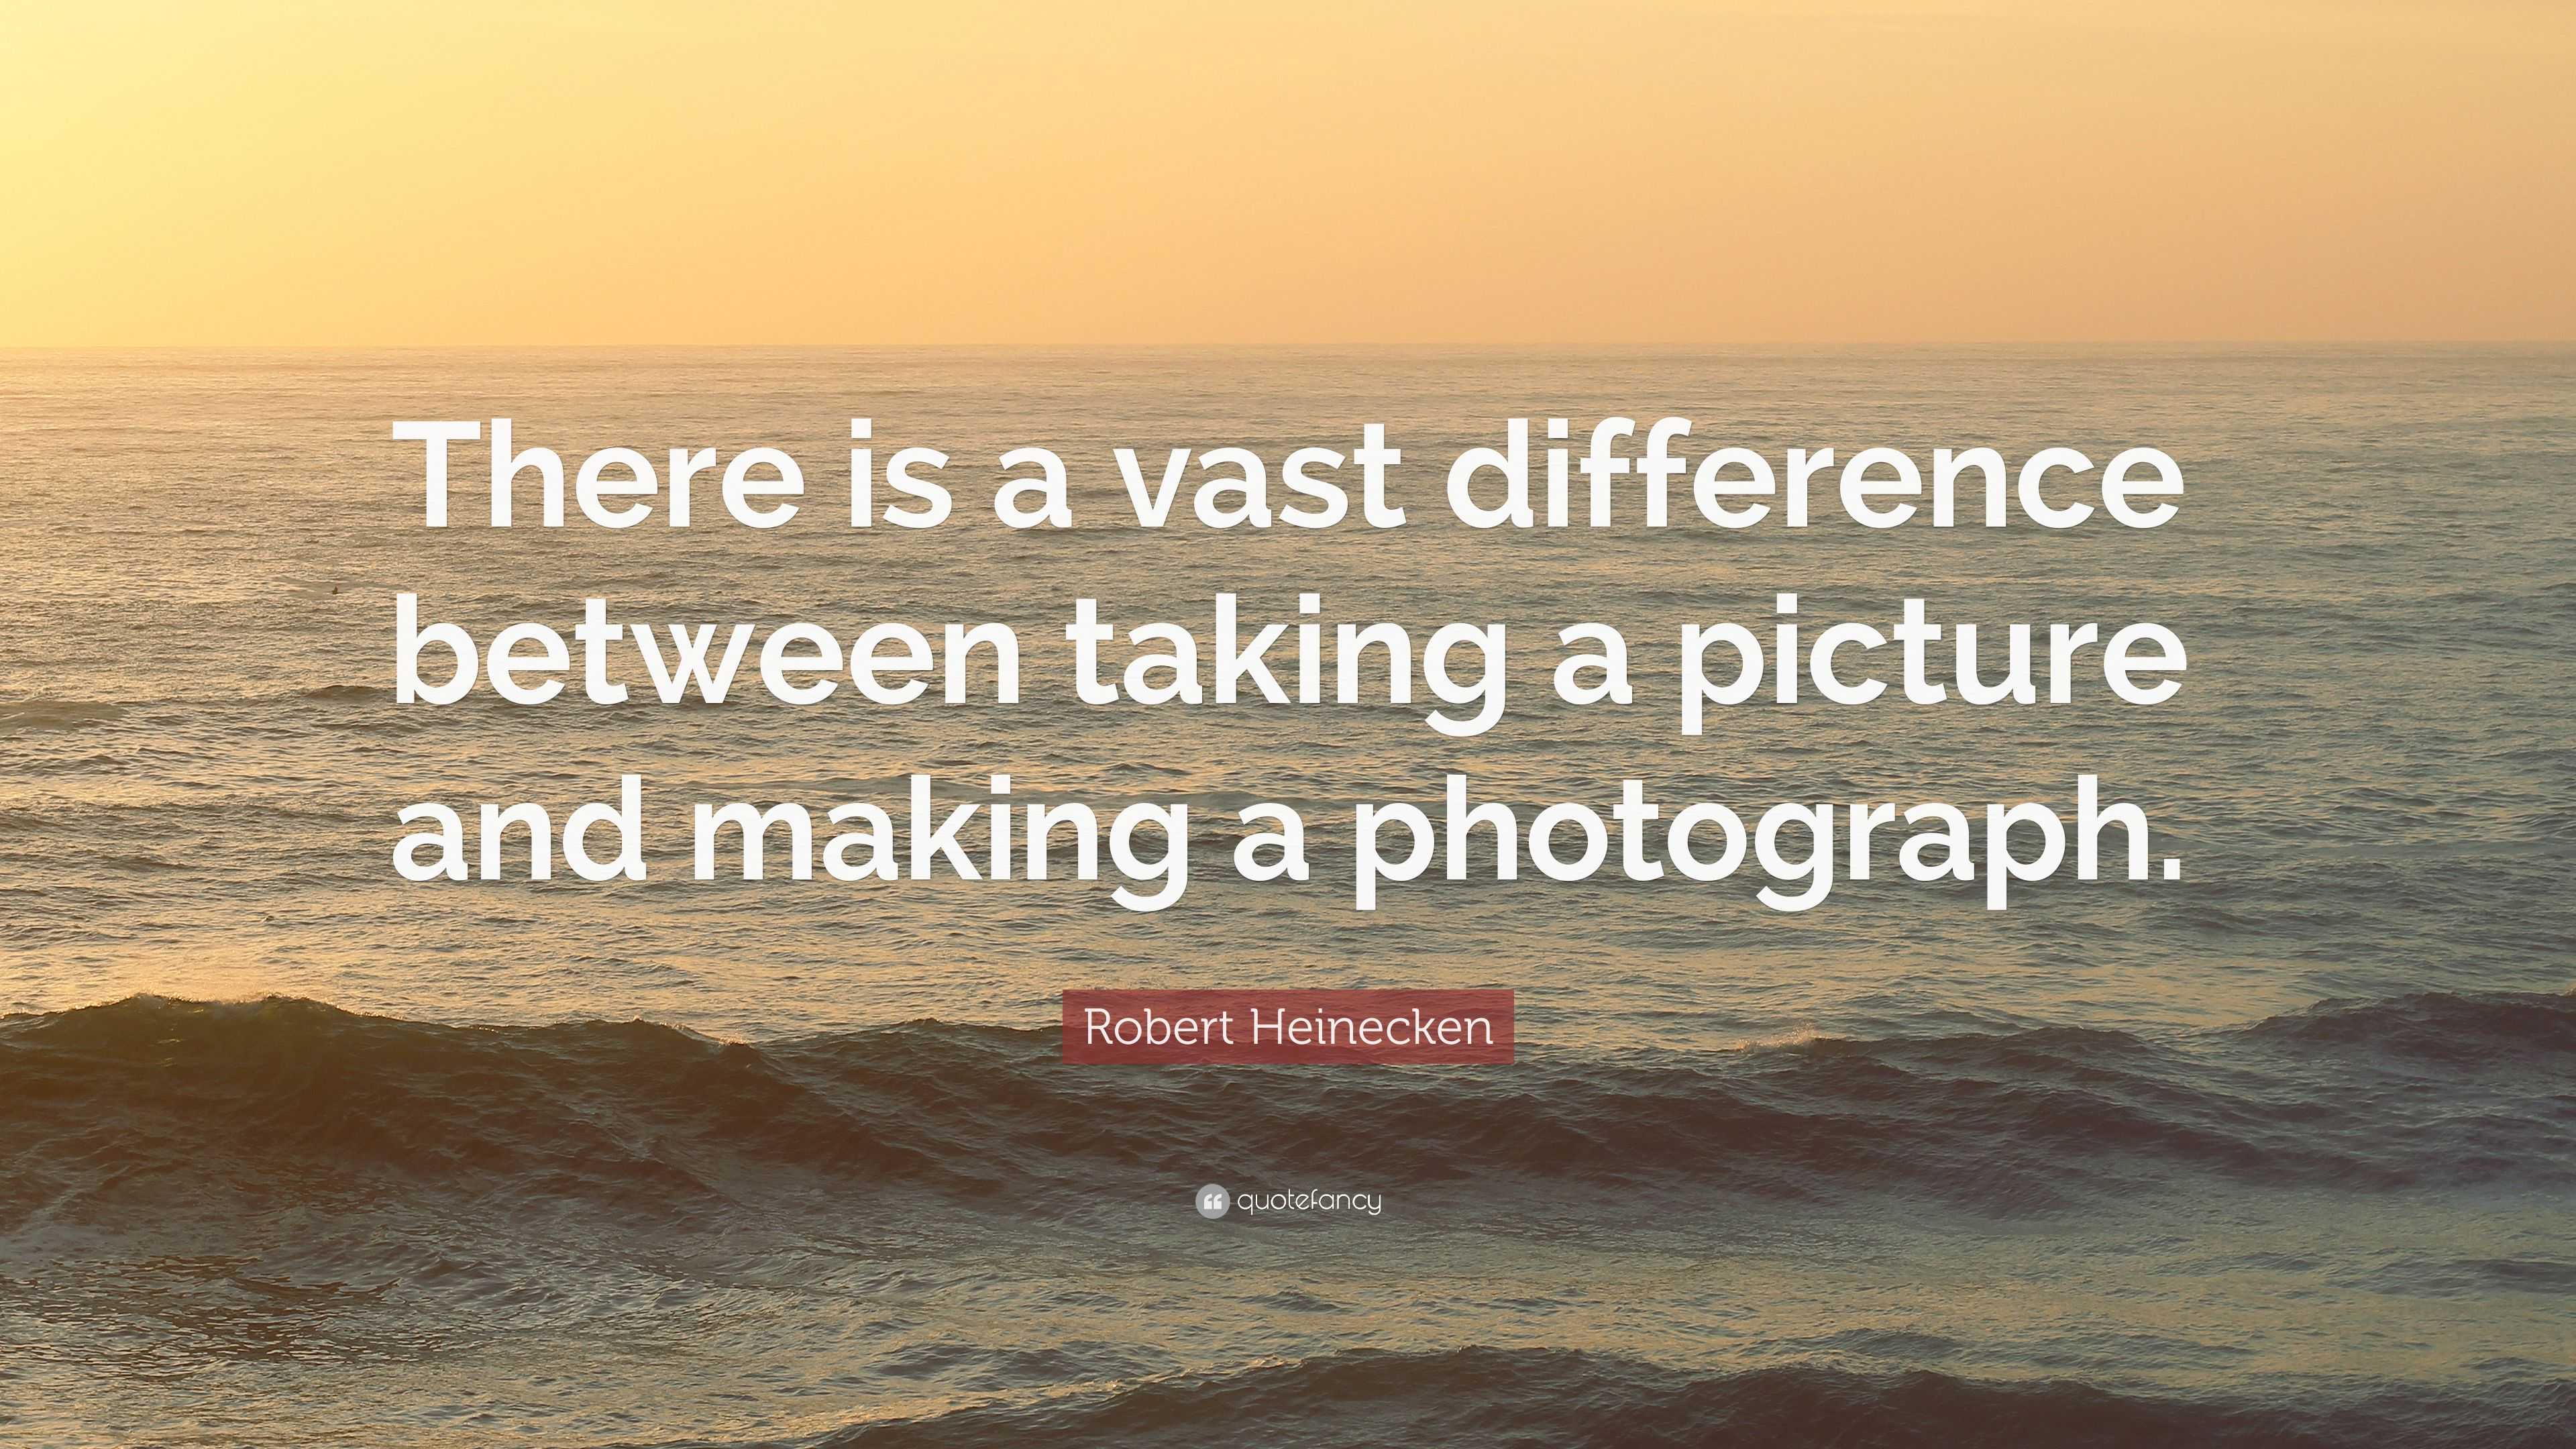 Robert Heinecken Quote: “There is a vast difference between taking a ...